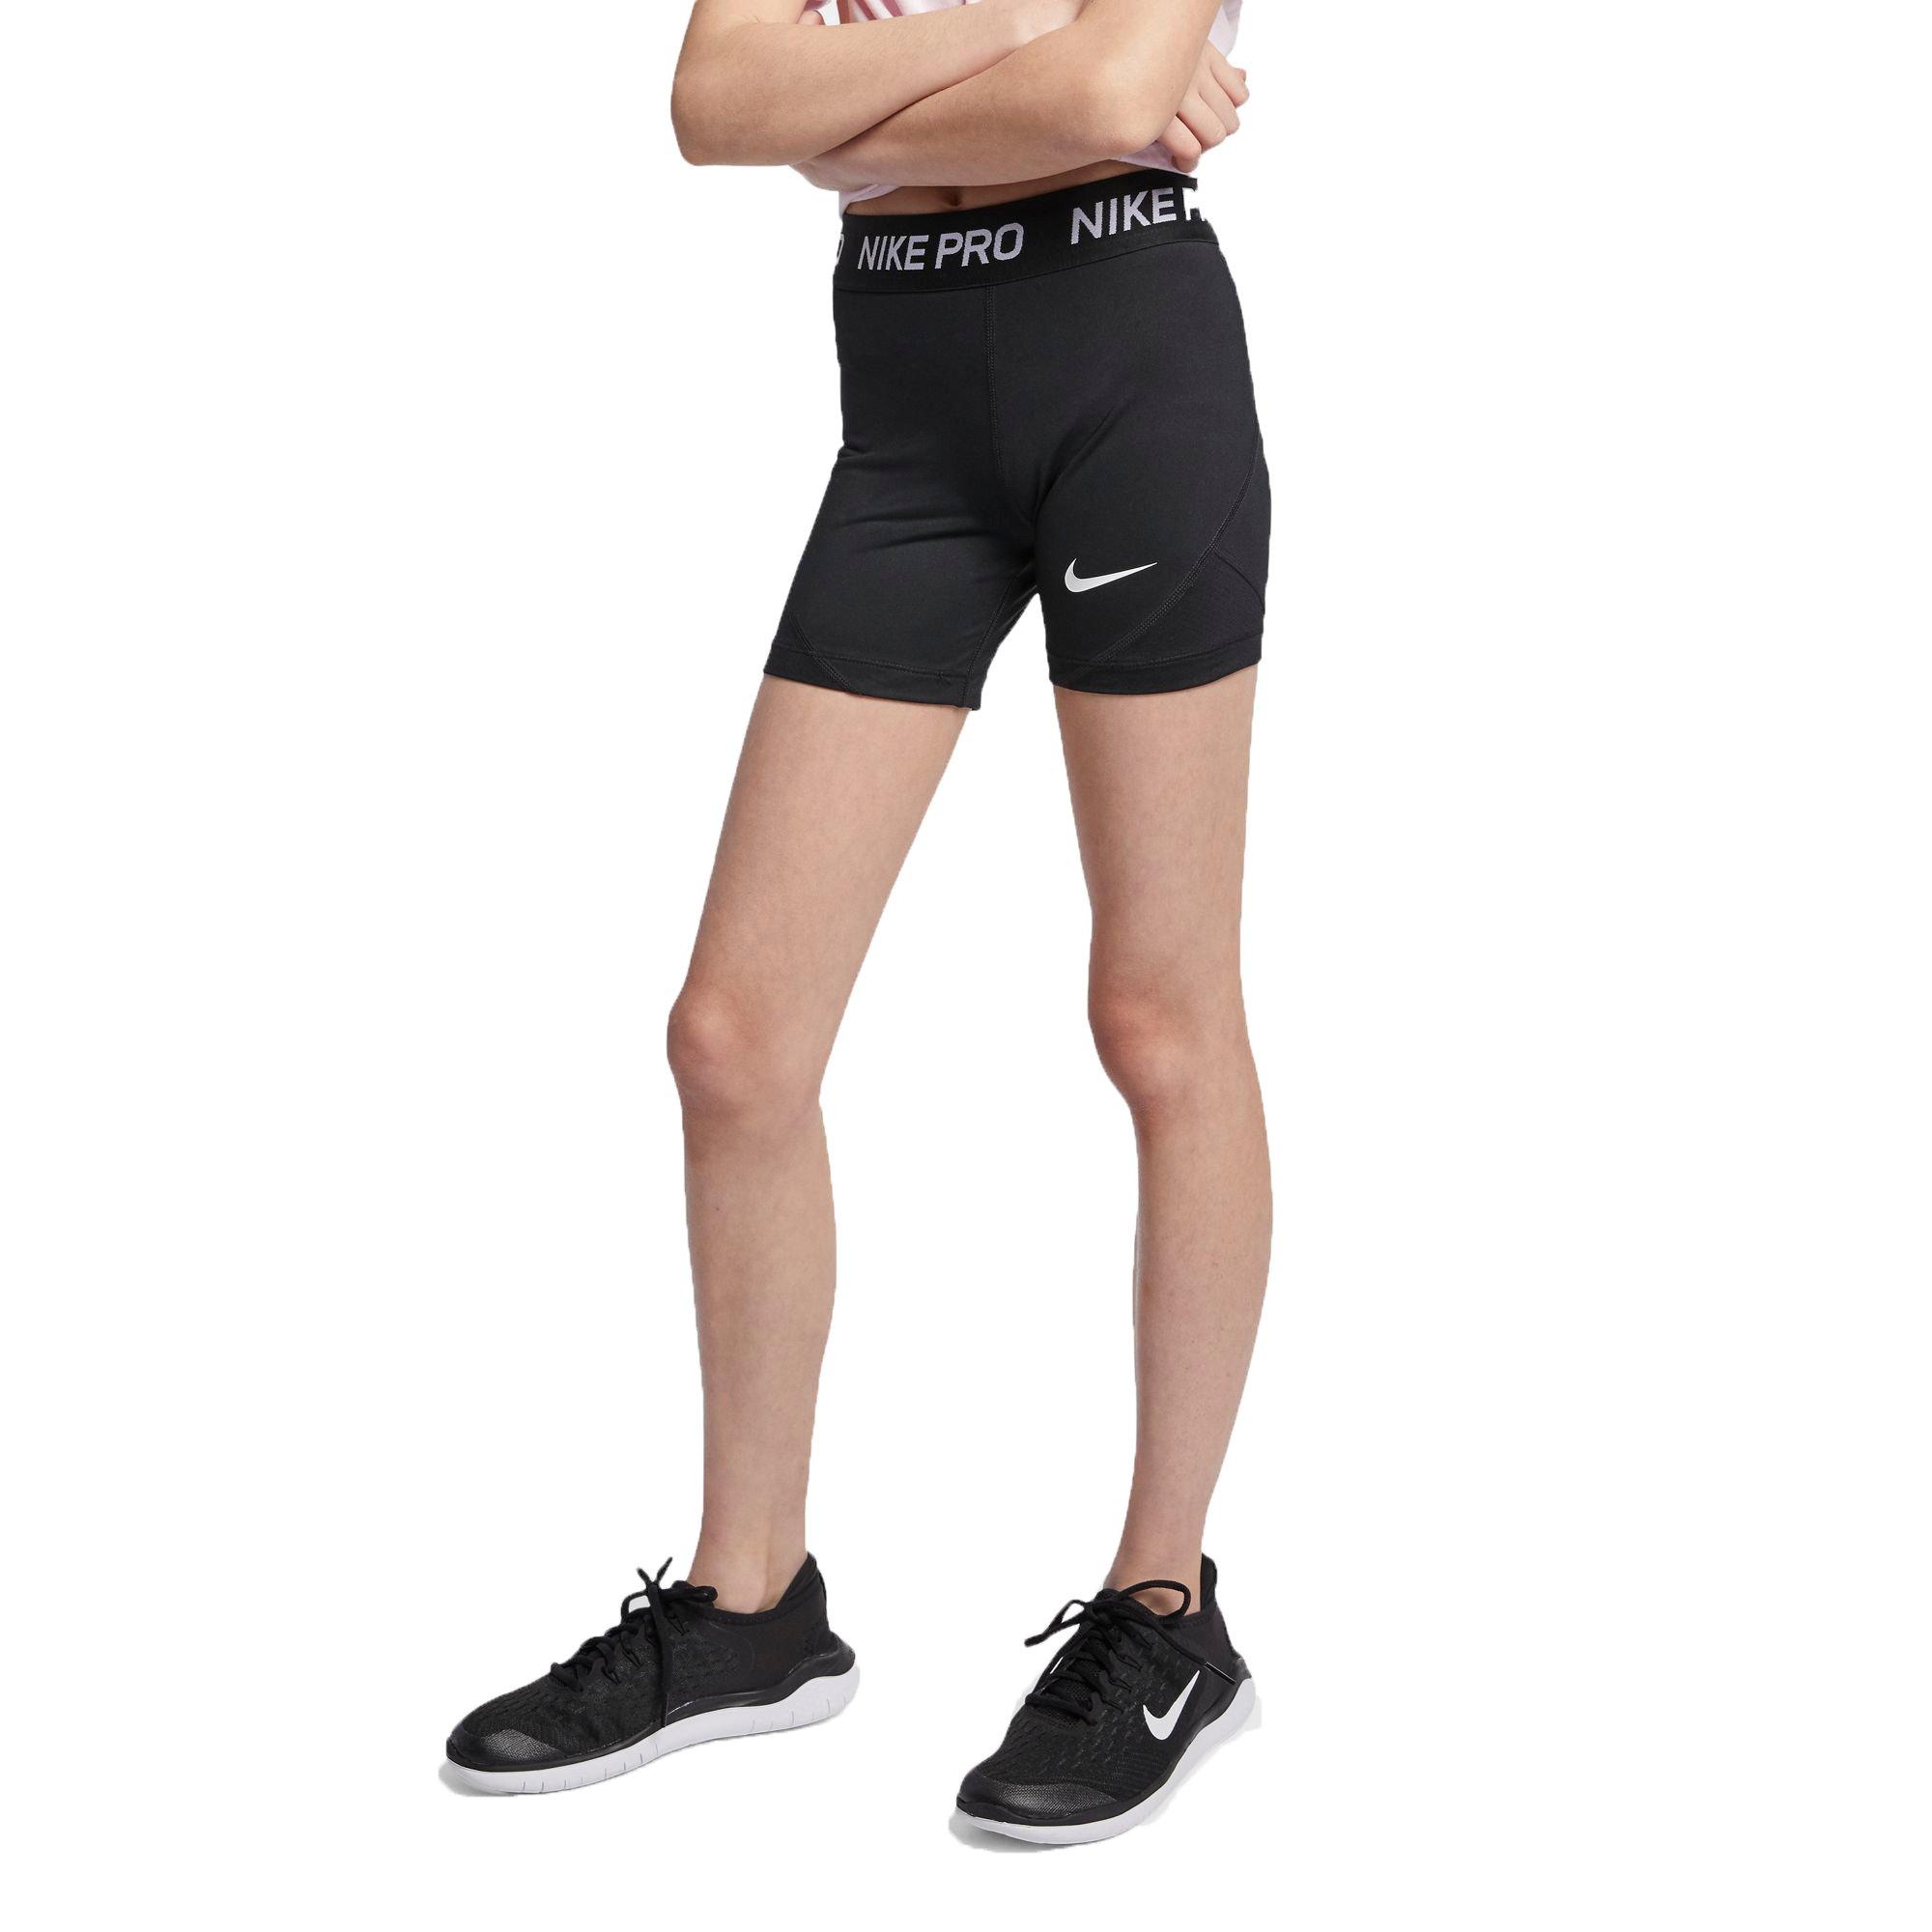 nike youth compression pants